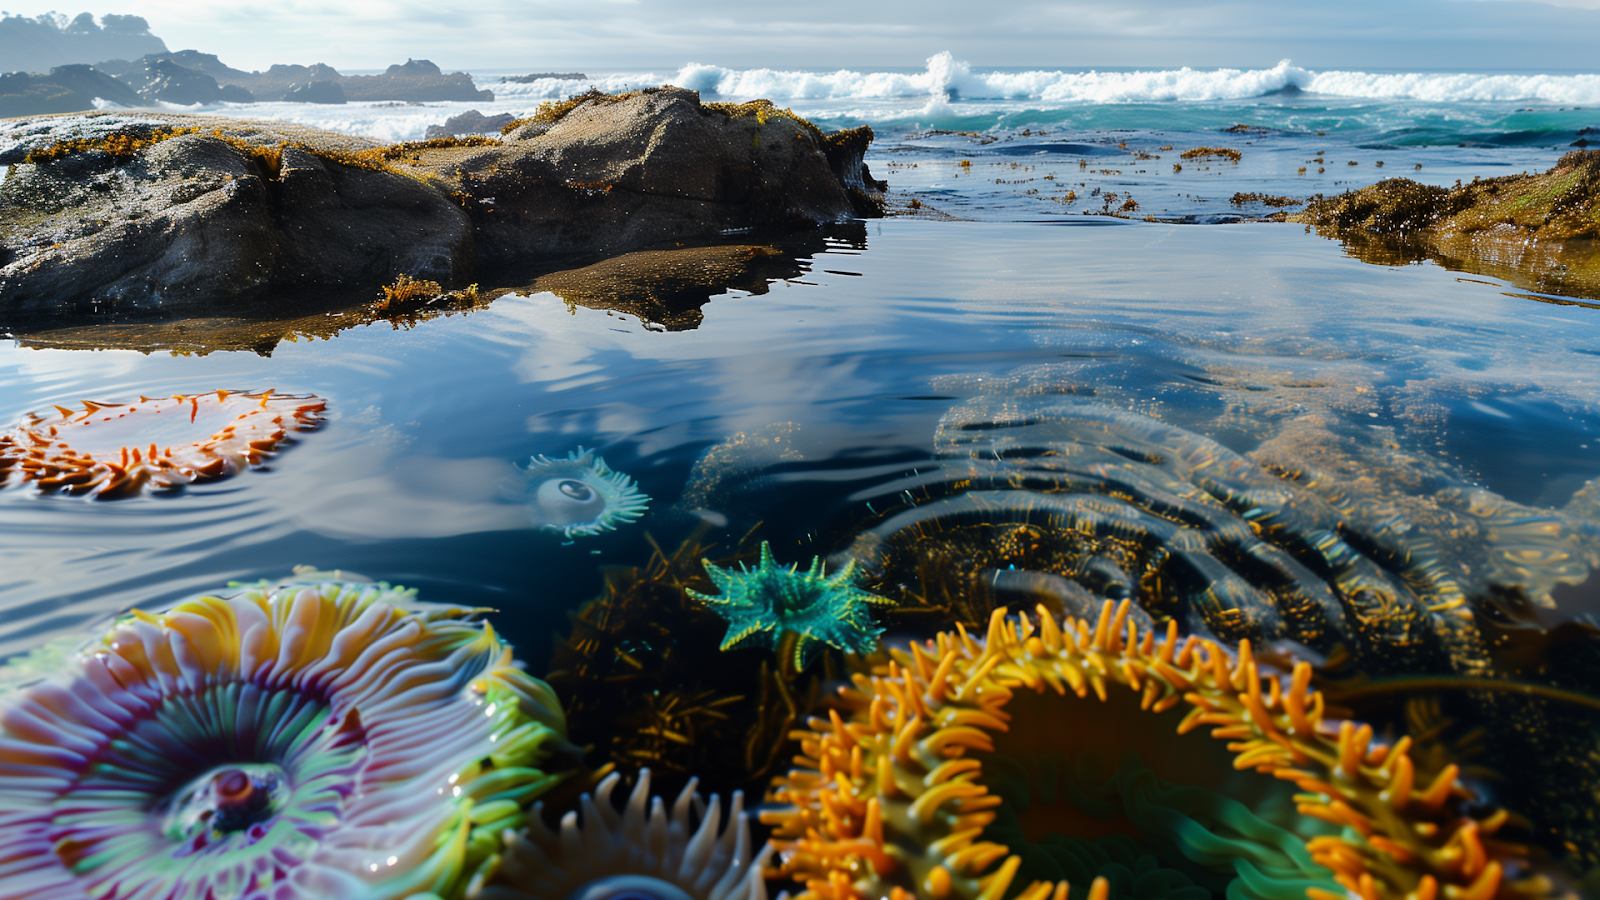 Vibrant tide pool at Laguna Beach with sea anemones and starfish, waves softly breaking in the distance.